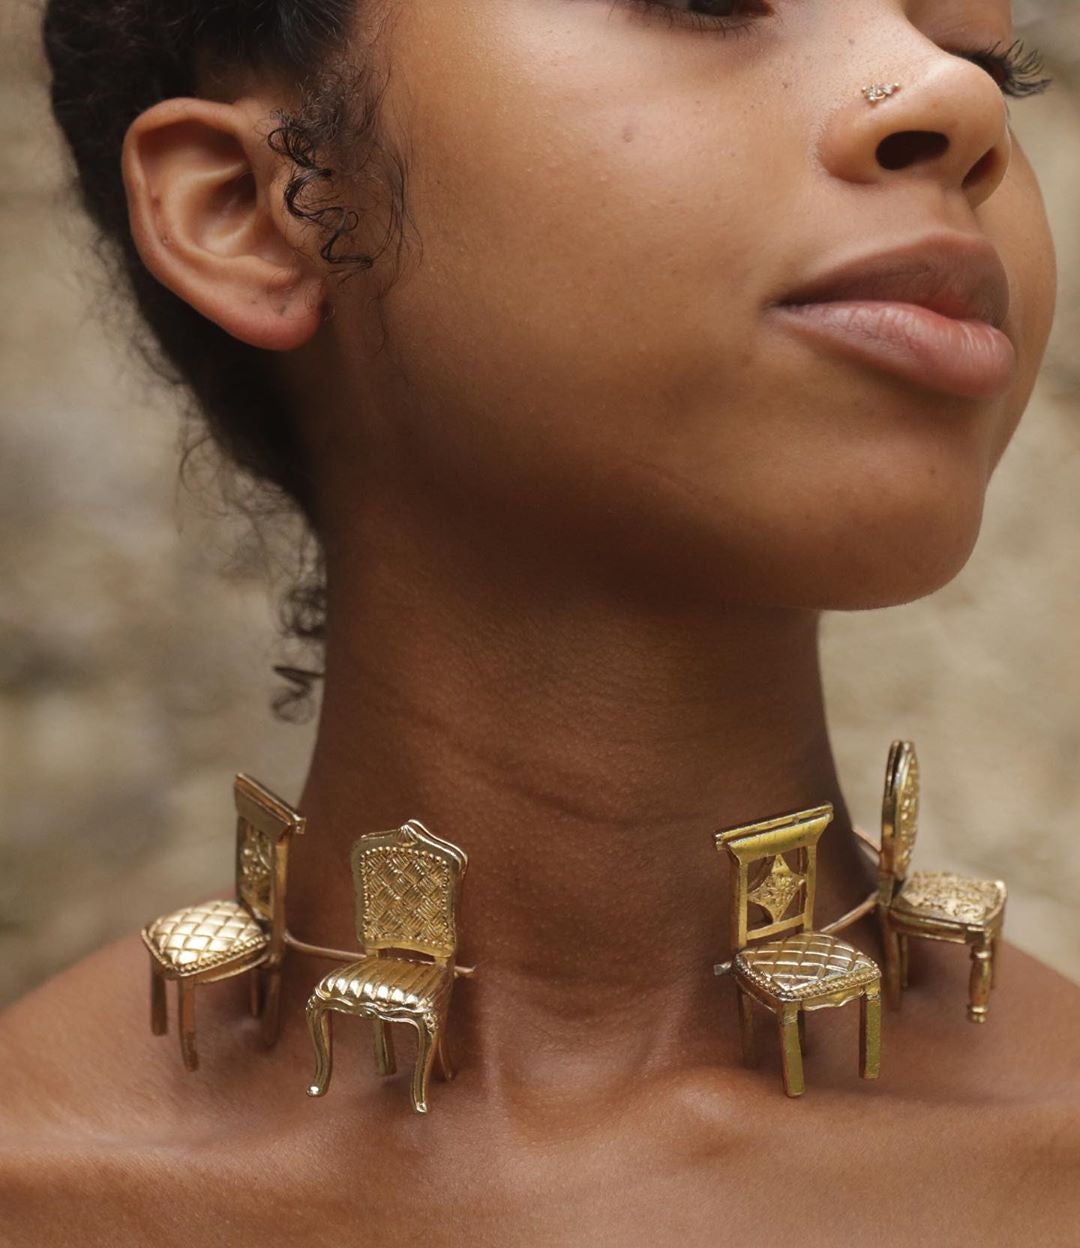 10 Jewelry Brands We're Obsessed With Right Now